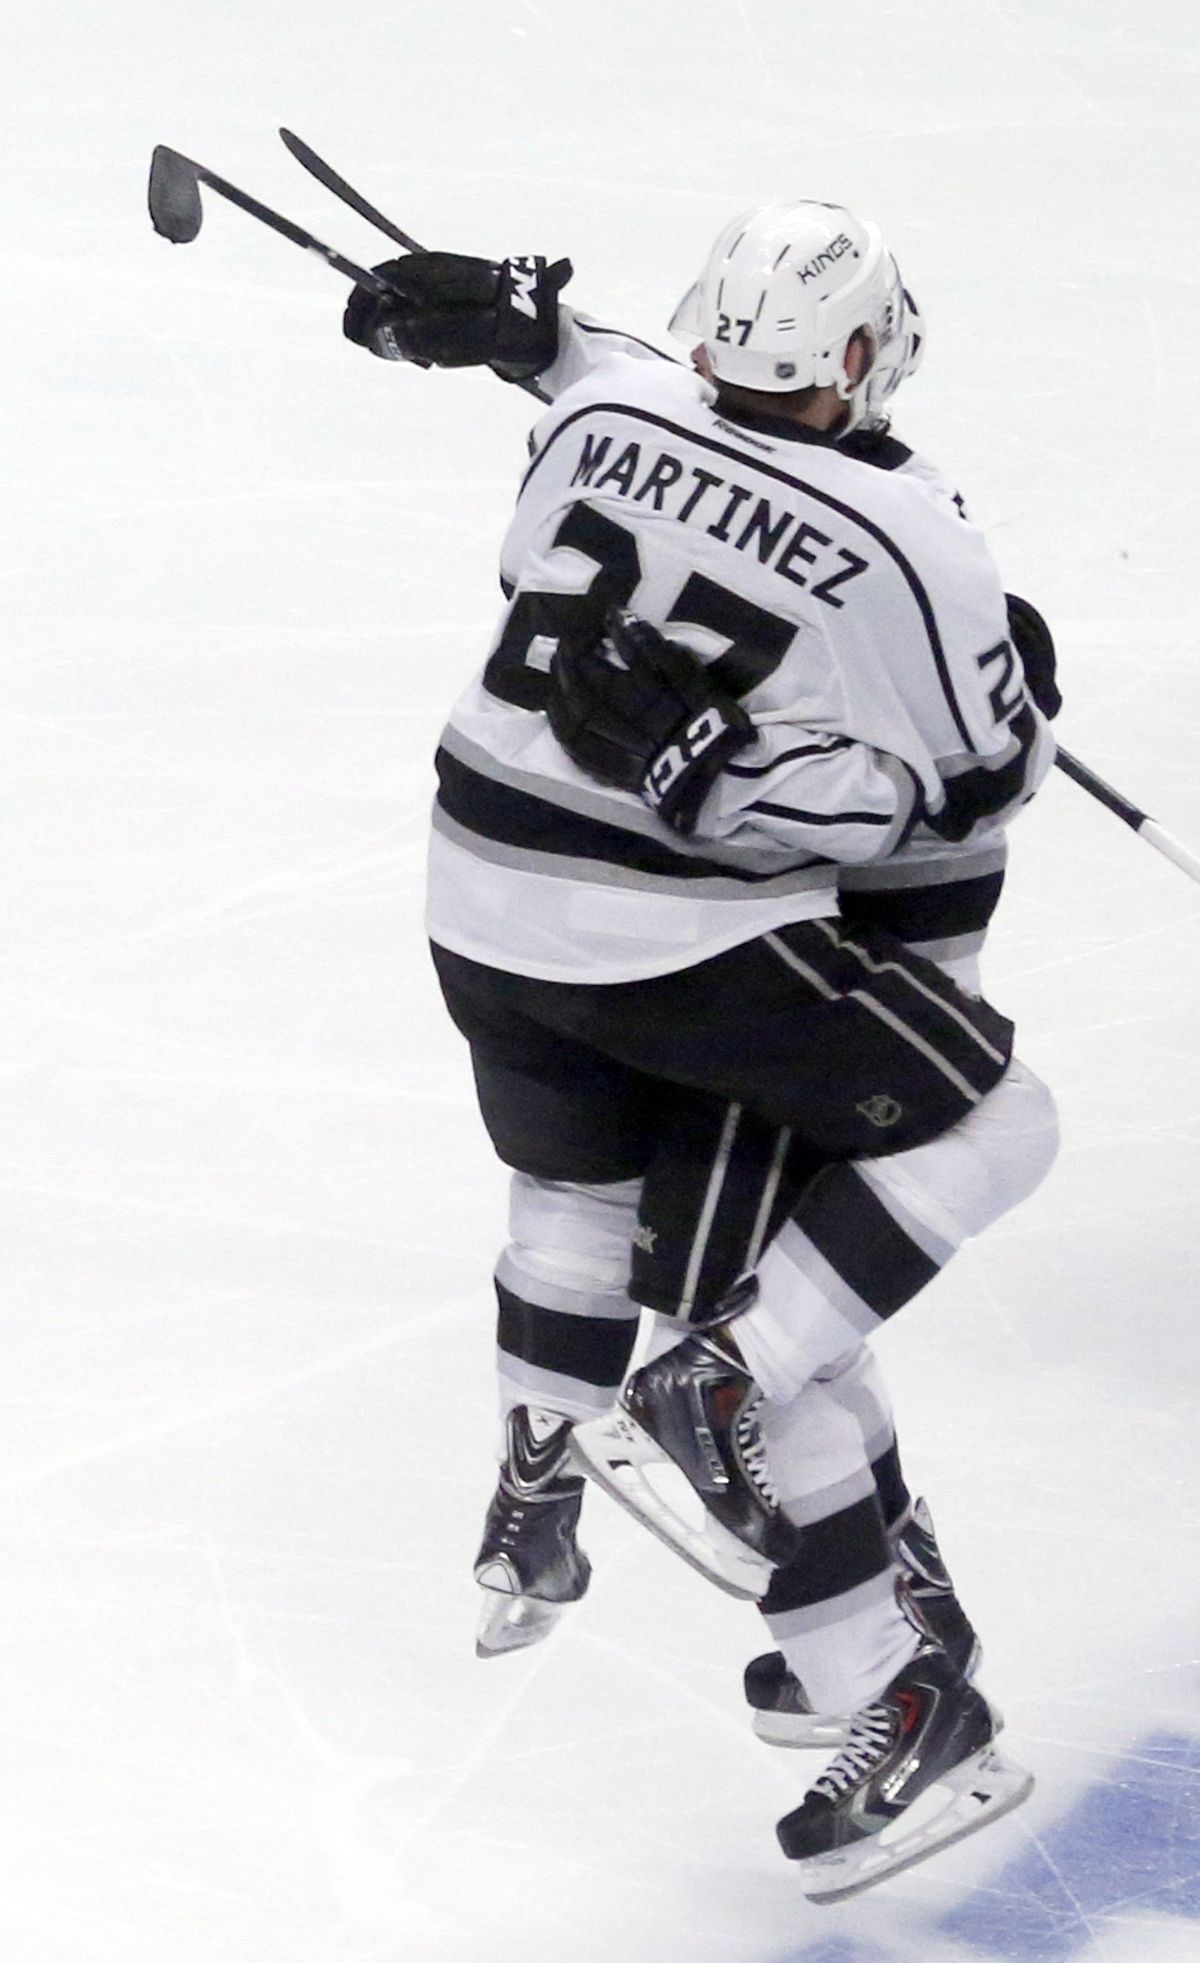 Alec Martinez jumps into teammate’s arms after scoring OT goal to beat Chicago 5-4. (Associated Press)